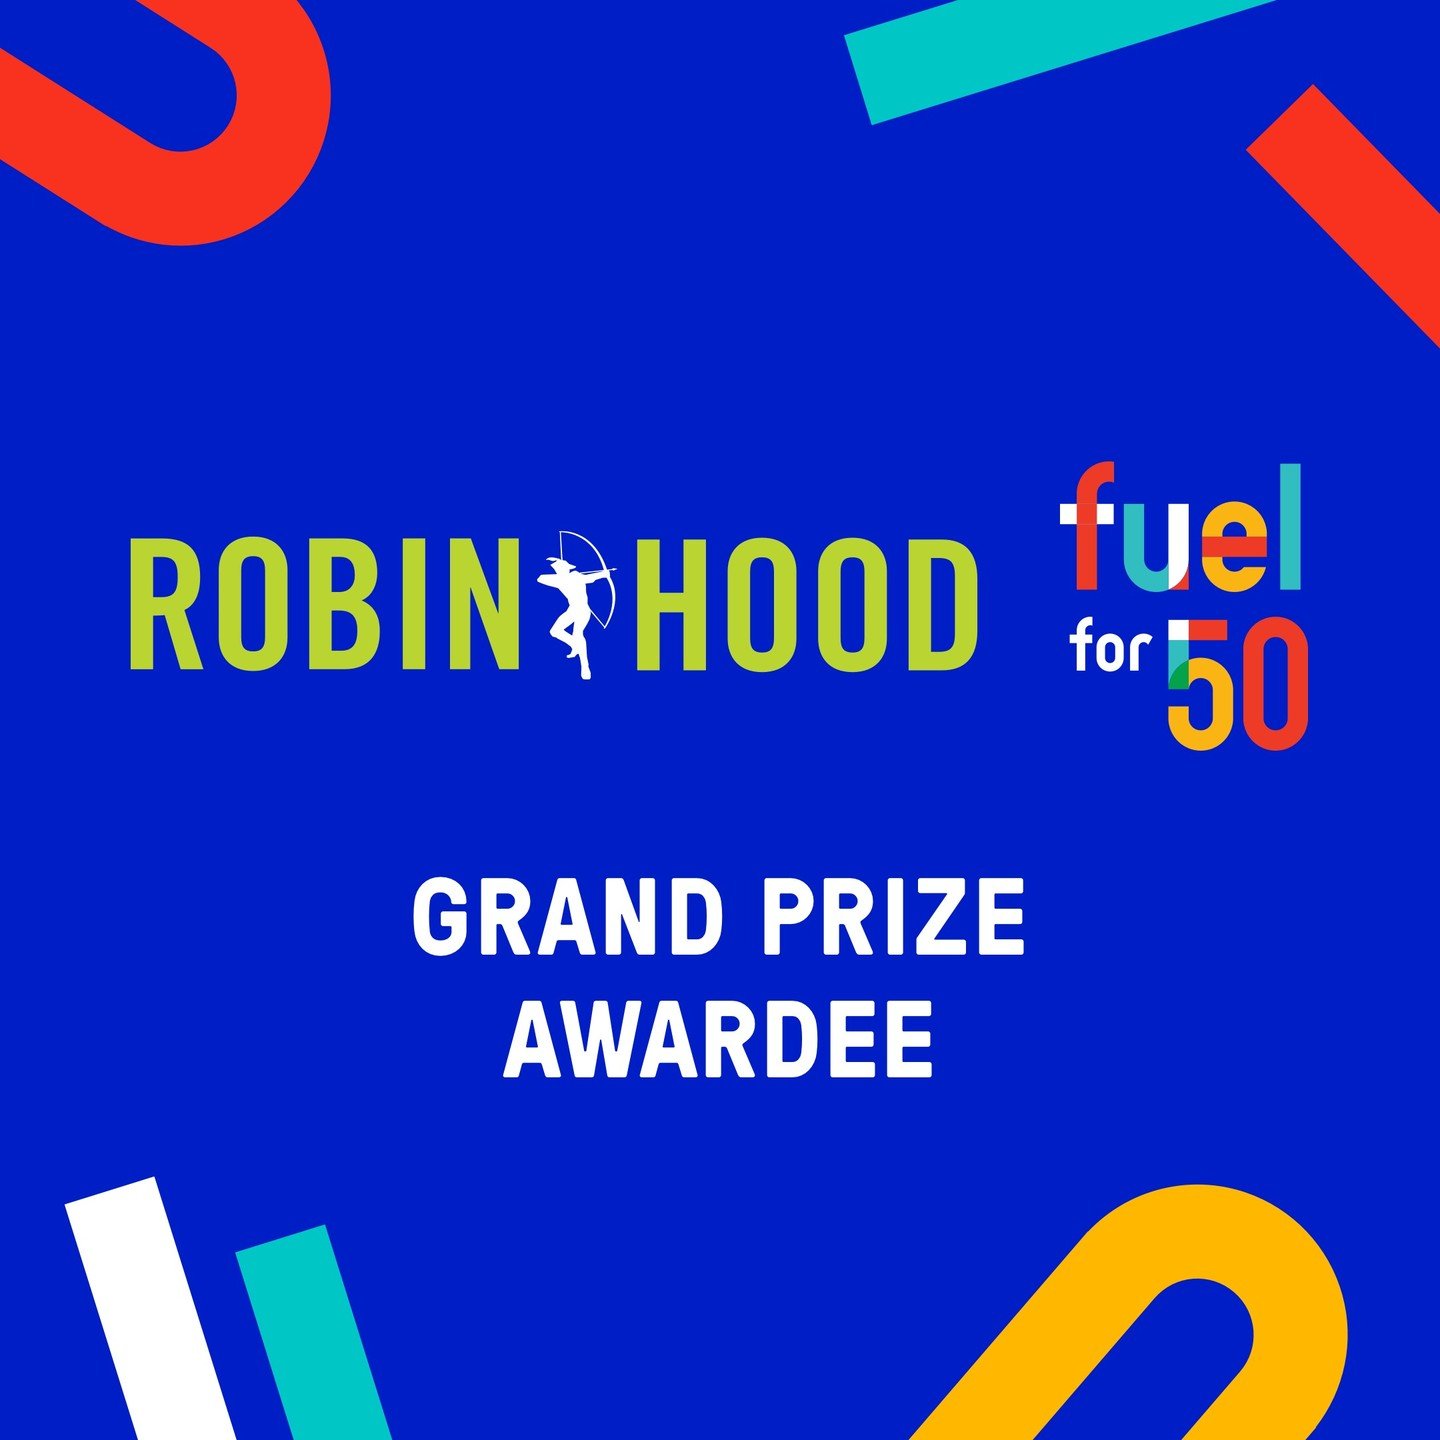 We&rsquo;re thrilled to announce that
Forestdale Inc. is one of three
#FUELfor50 grand prize winners! This award means nearly $1 million in
funding to scale our work in parent-child therapy and the healing of intergenerational trauma.
Together with @